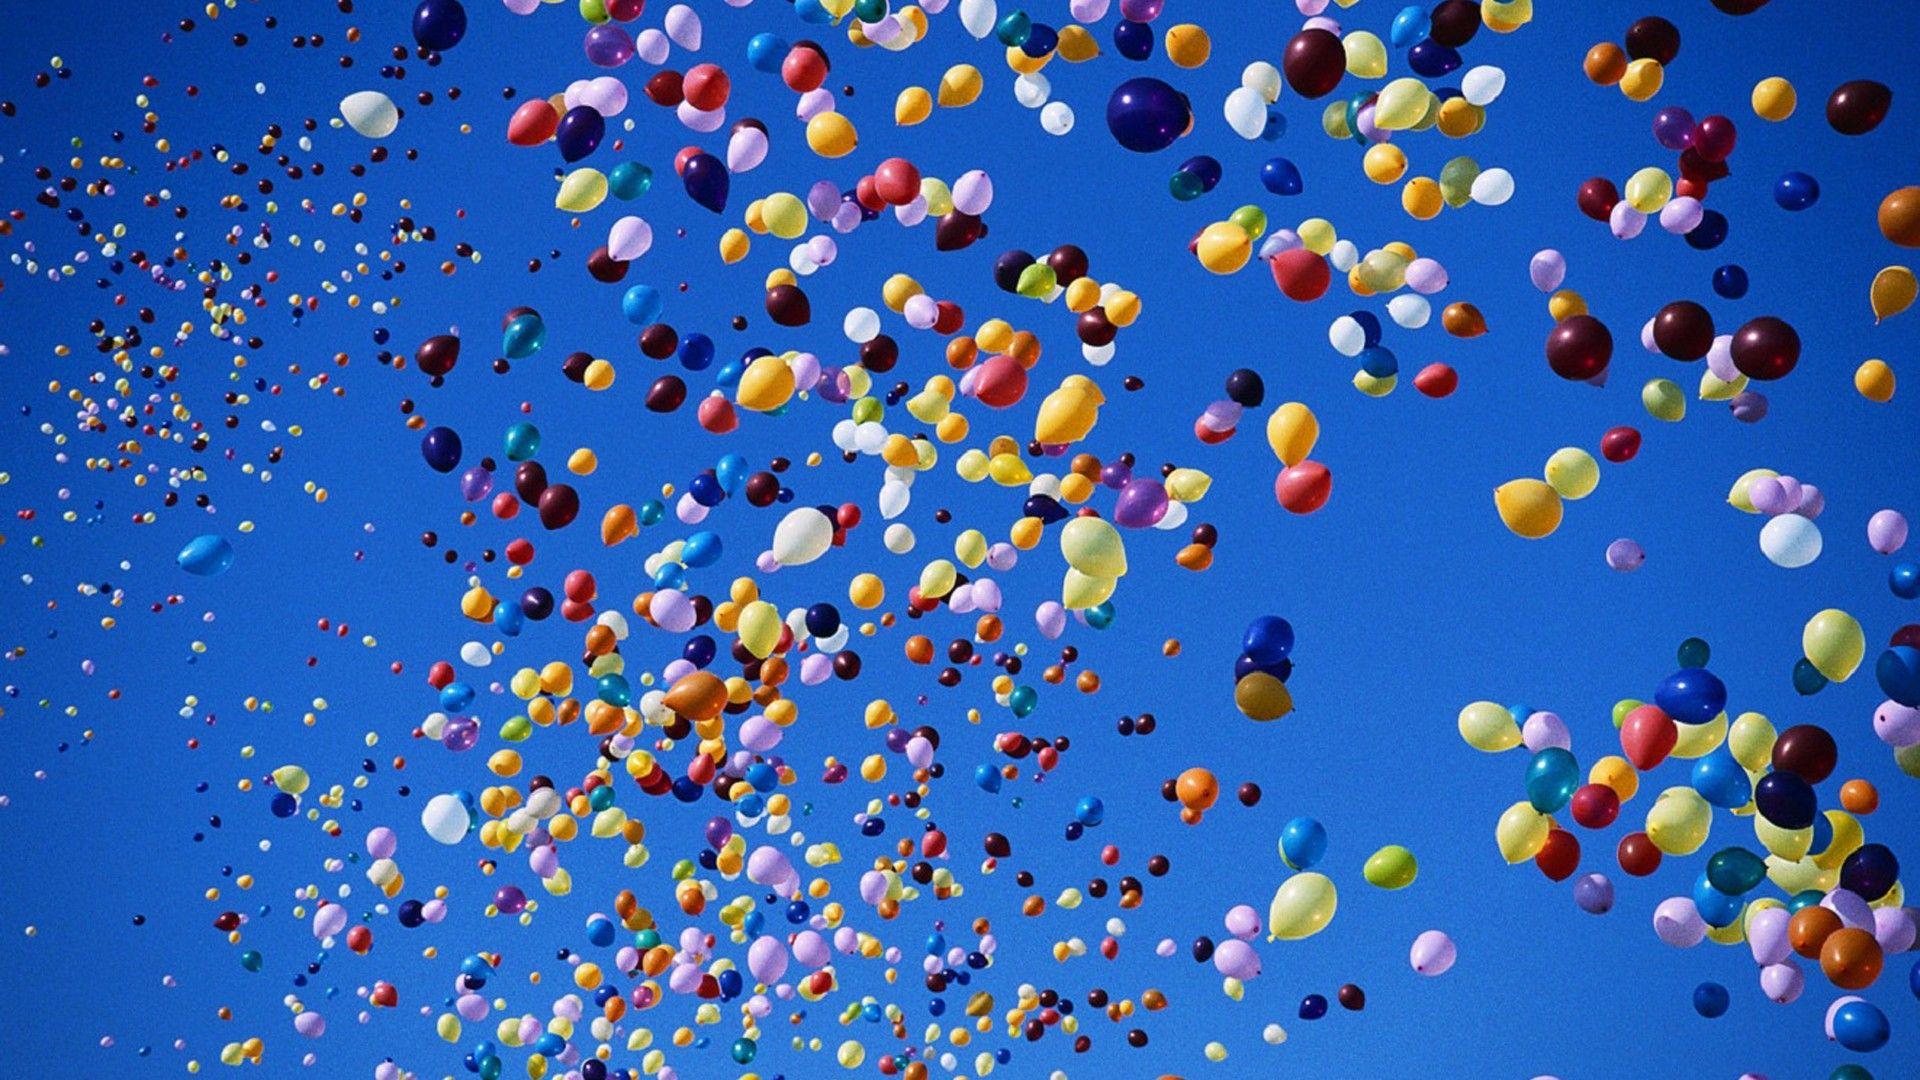 Colorful Balloons Desktop Wallpaper and Image. Cool